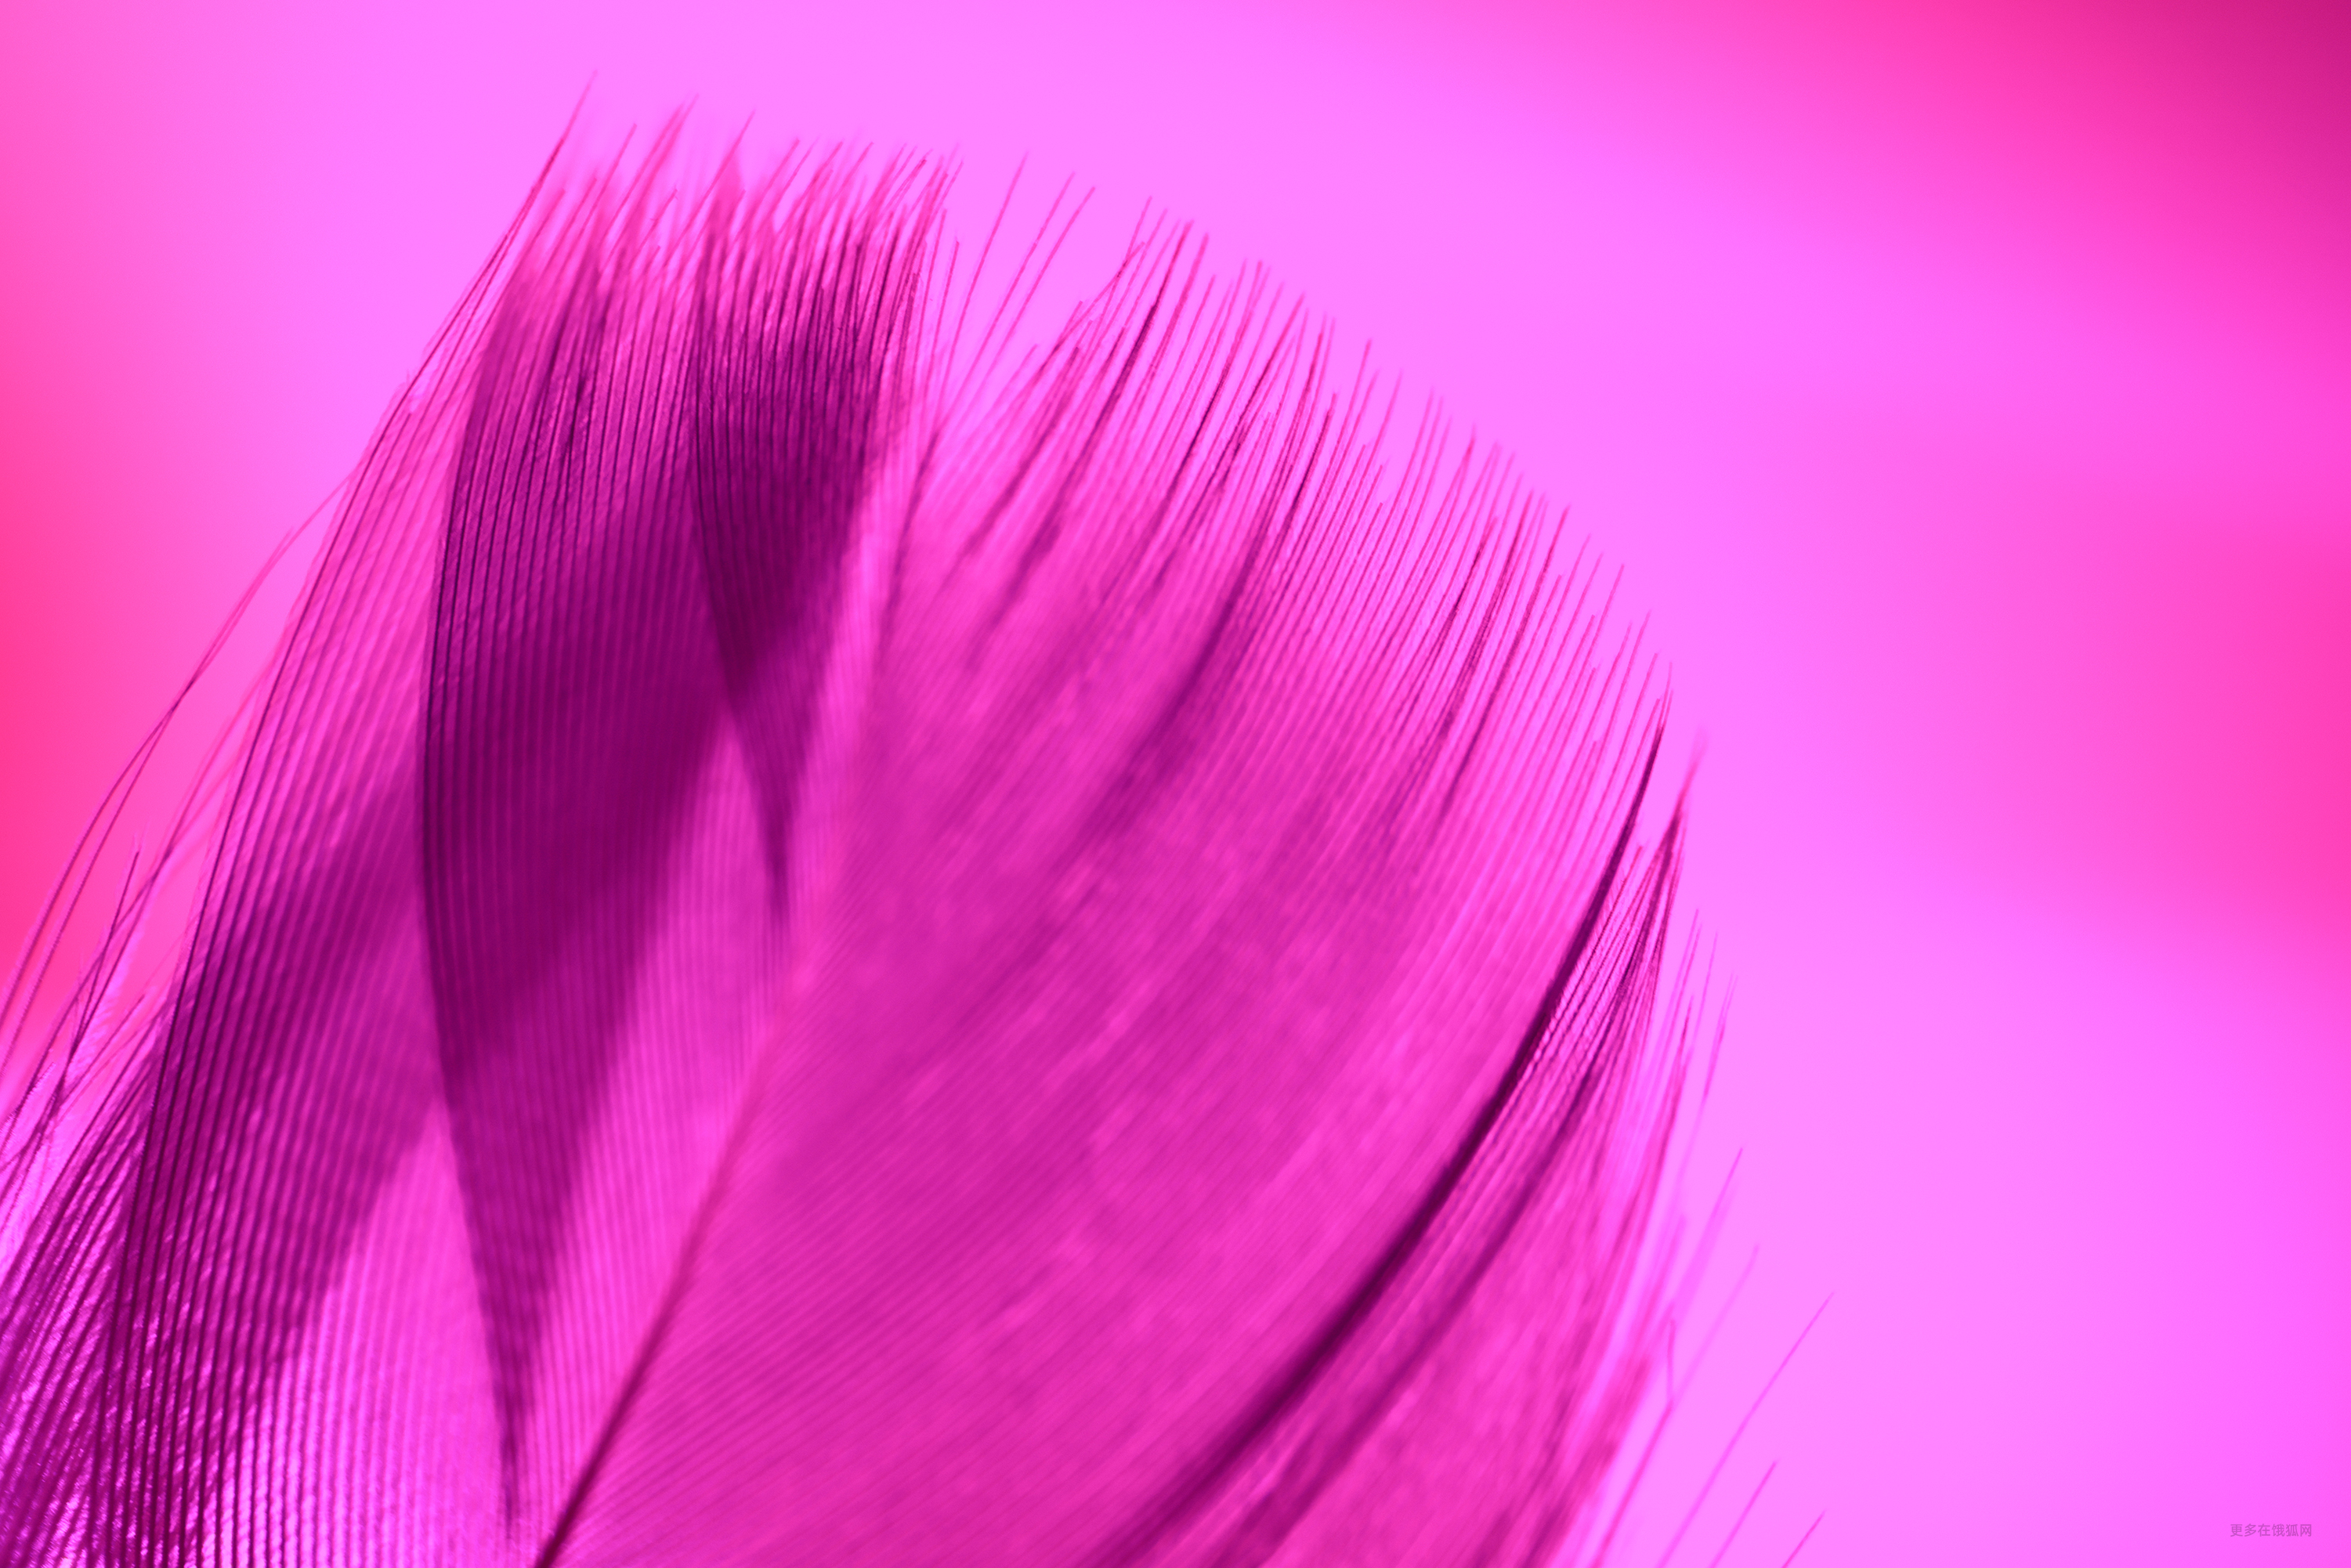 General 3001x2002 purple background feathers simple background magenta